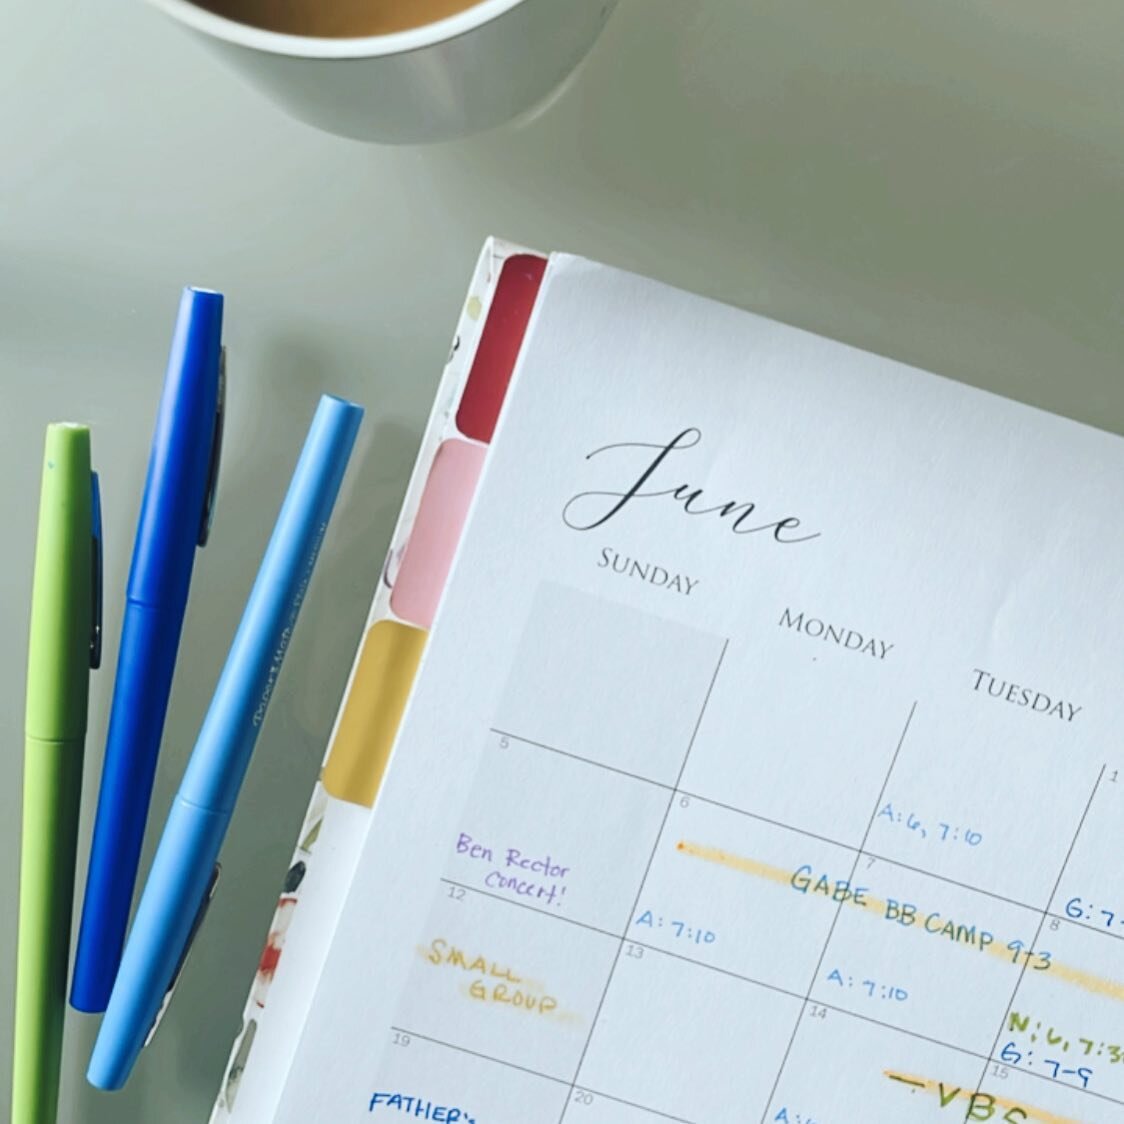 Planners can be tricky. In the past, I&rsquo;d start the new year with a fresh new planner only to neglect it like a New Years resolution and come back to it later to use as grocery paper lists (that way I felt I could justify that I didn&rsquo;t COM